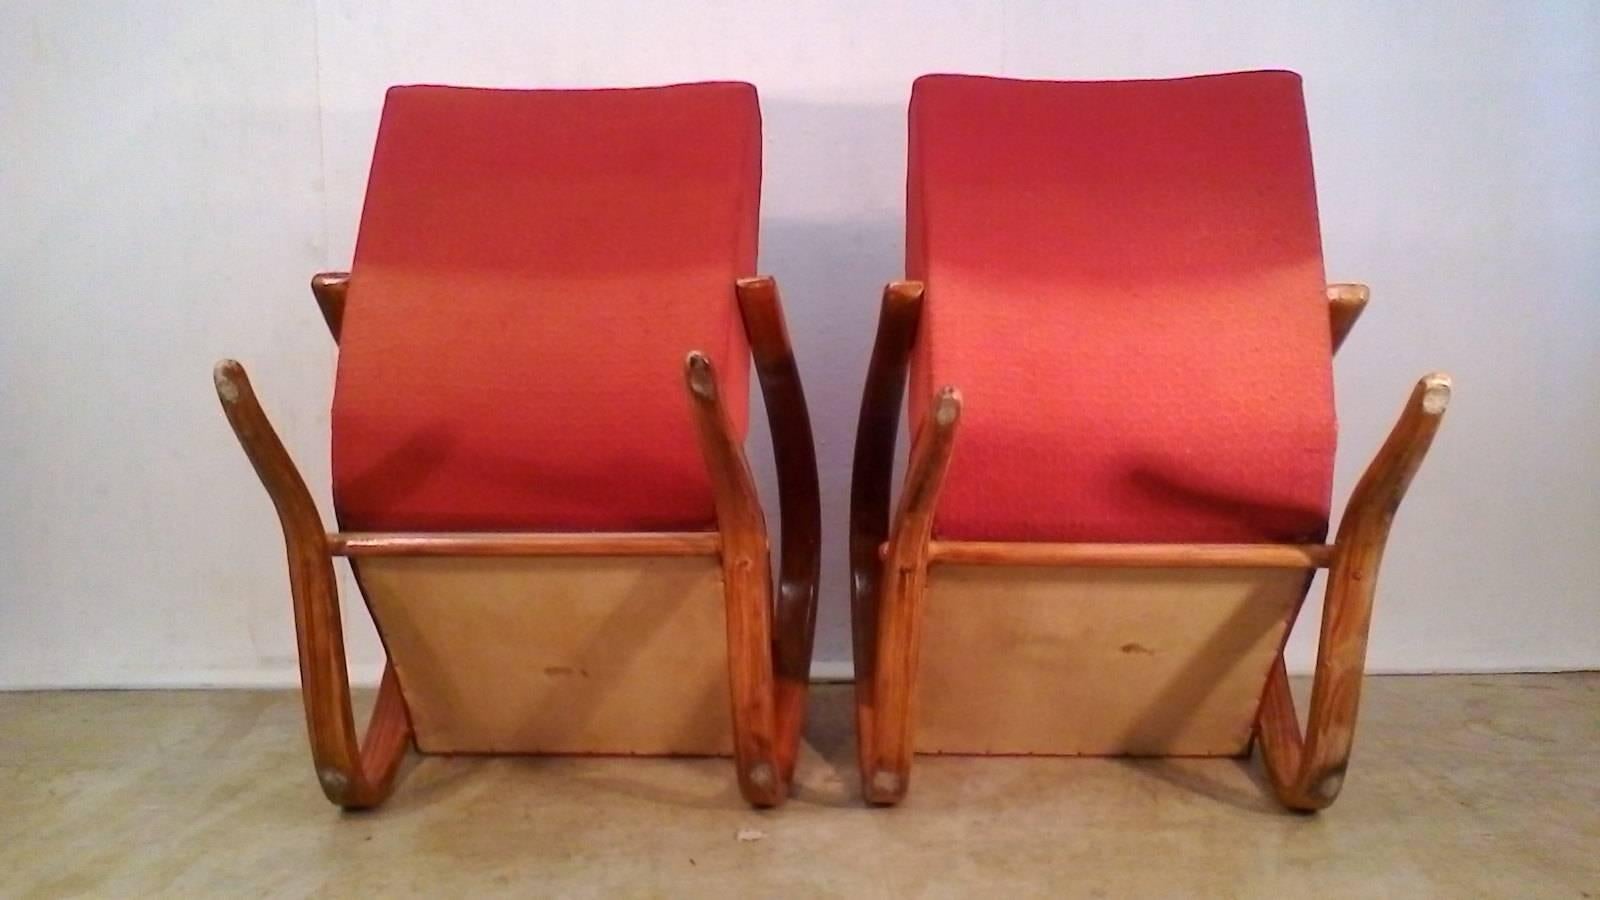 Fabric Pair of H269 Armchairs by Jindrich Halabala in Original Upholstery, 1930